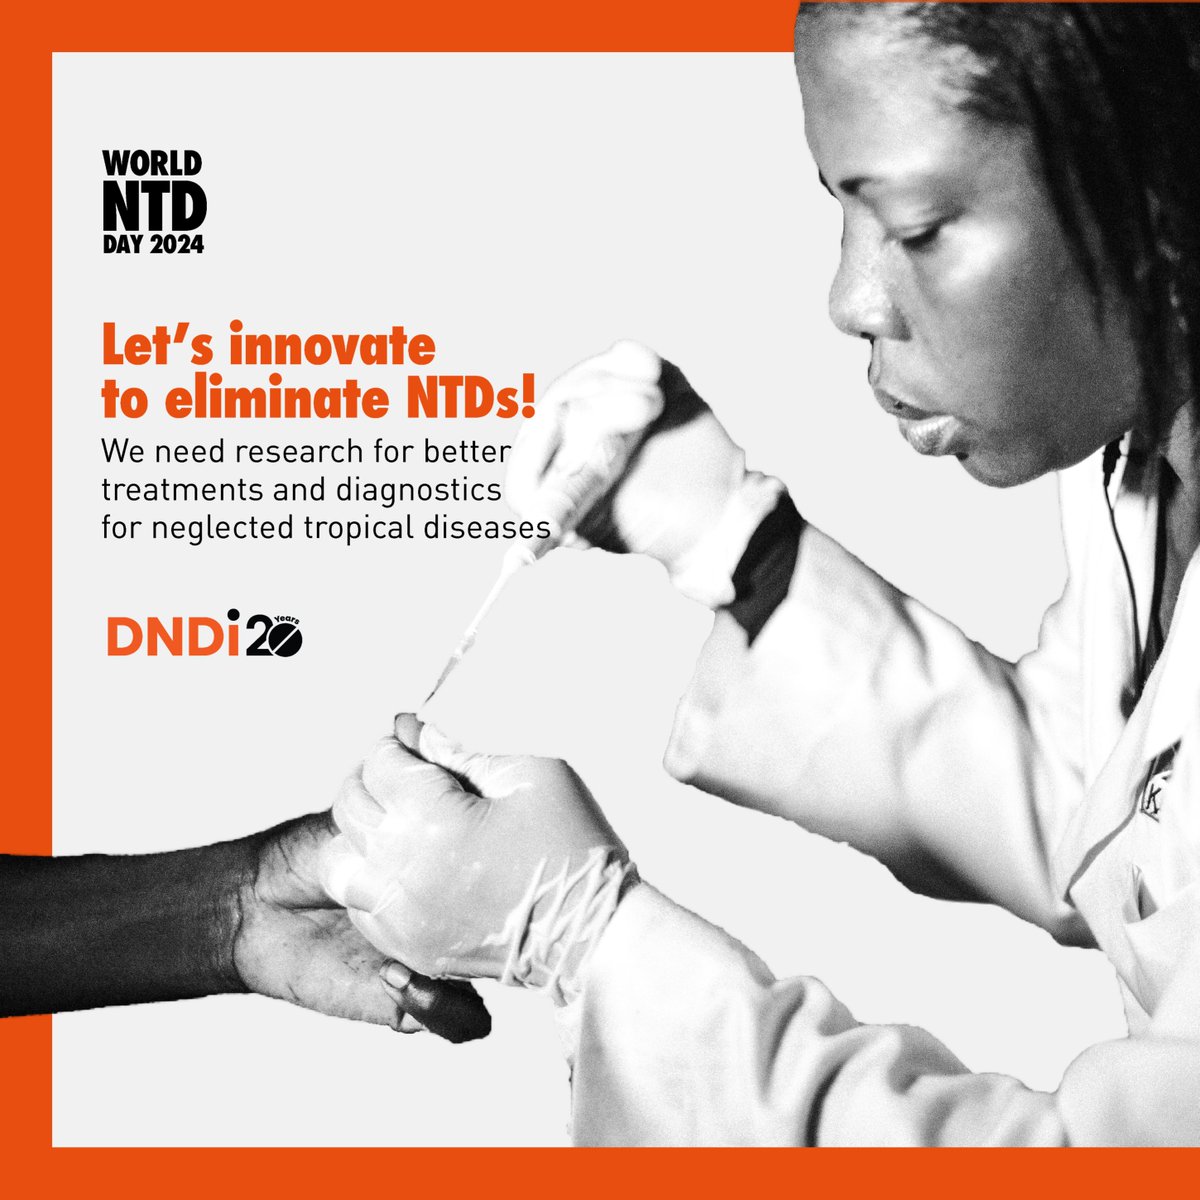 Today is #WorldNTDDay! Medical research should be for all – not just diseases that can turn a profit. By #InnovatingTogether we can bring people affected by #NTDs out of the shadows and develop safer, simpler, more effective treatments. #UniteActEliminate